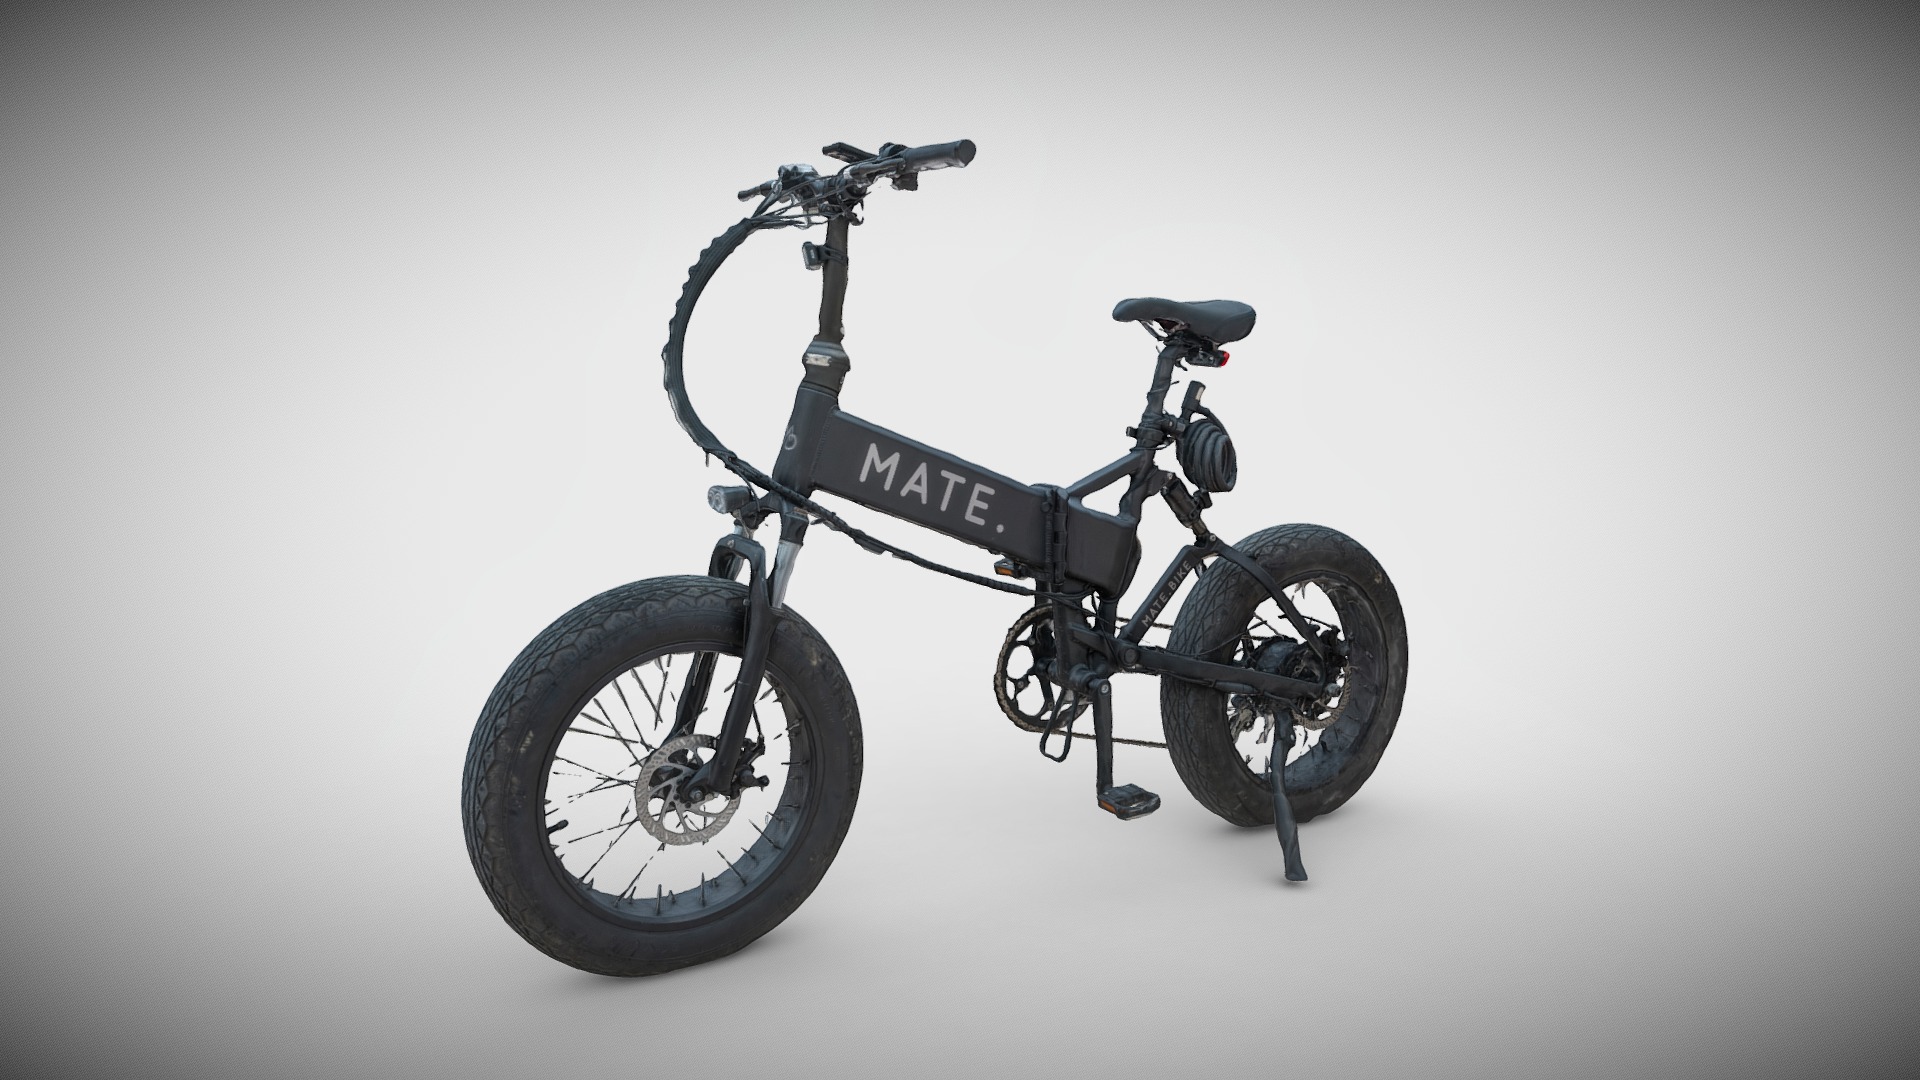 3D model Mate X Electric Bike - This is a 3D model of the Mate X Electric Bike. The 3D model is about a black and white mountain bike.